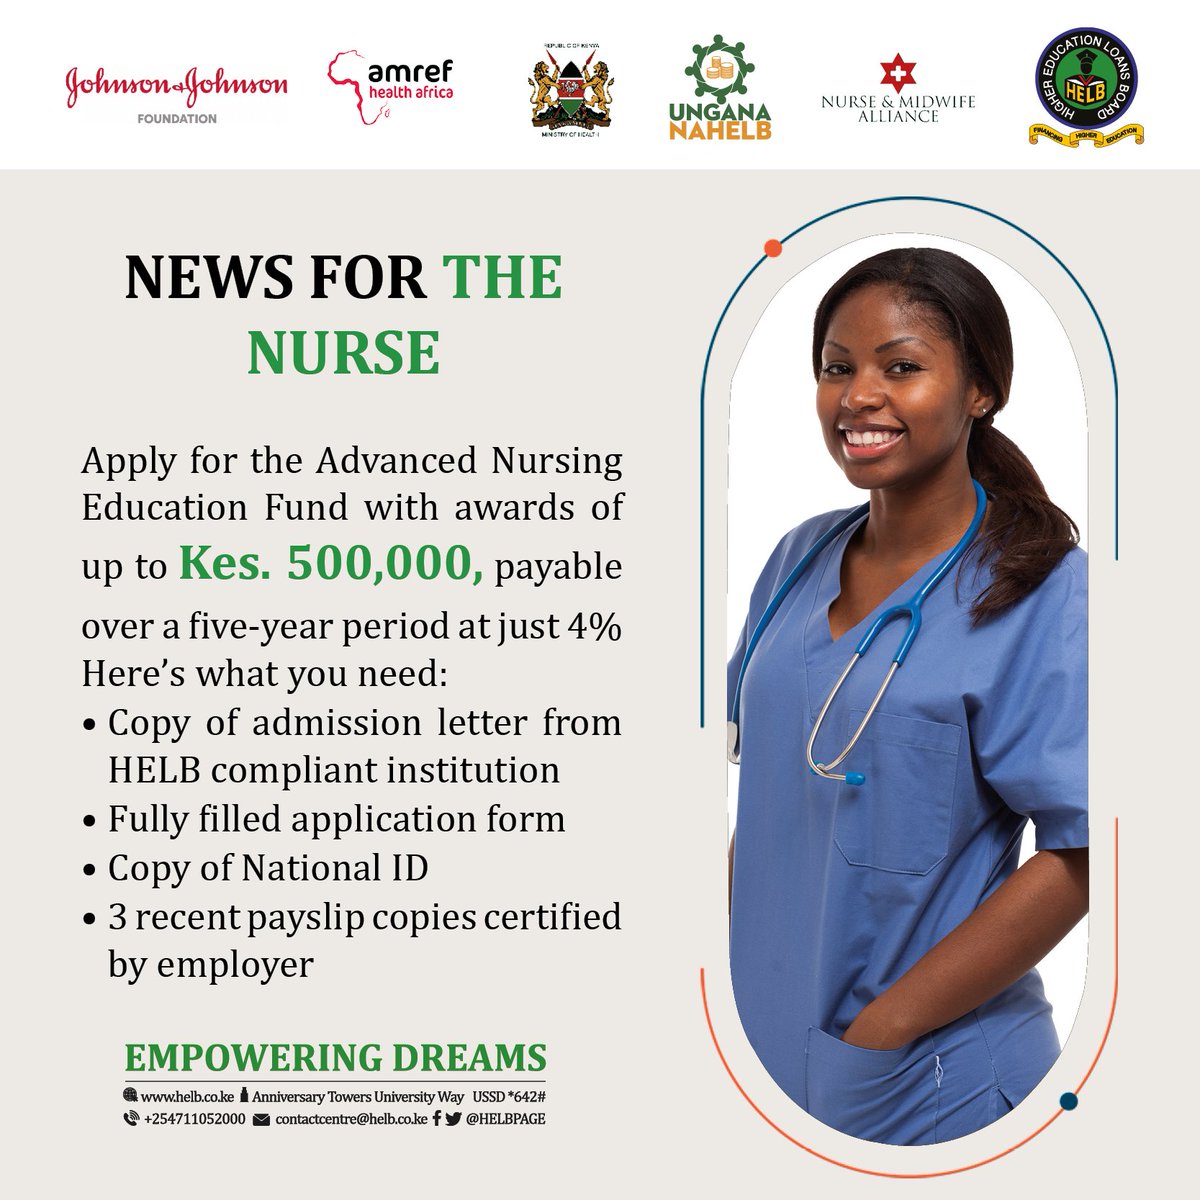 Exciting news! Application is now open for the Advanced Nursing Education Fund: flexible, affordable study loans for Nurses pursuing advanced & specialized courses in approved training institutions in Kenya.